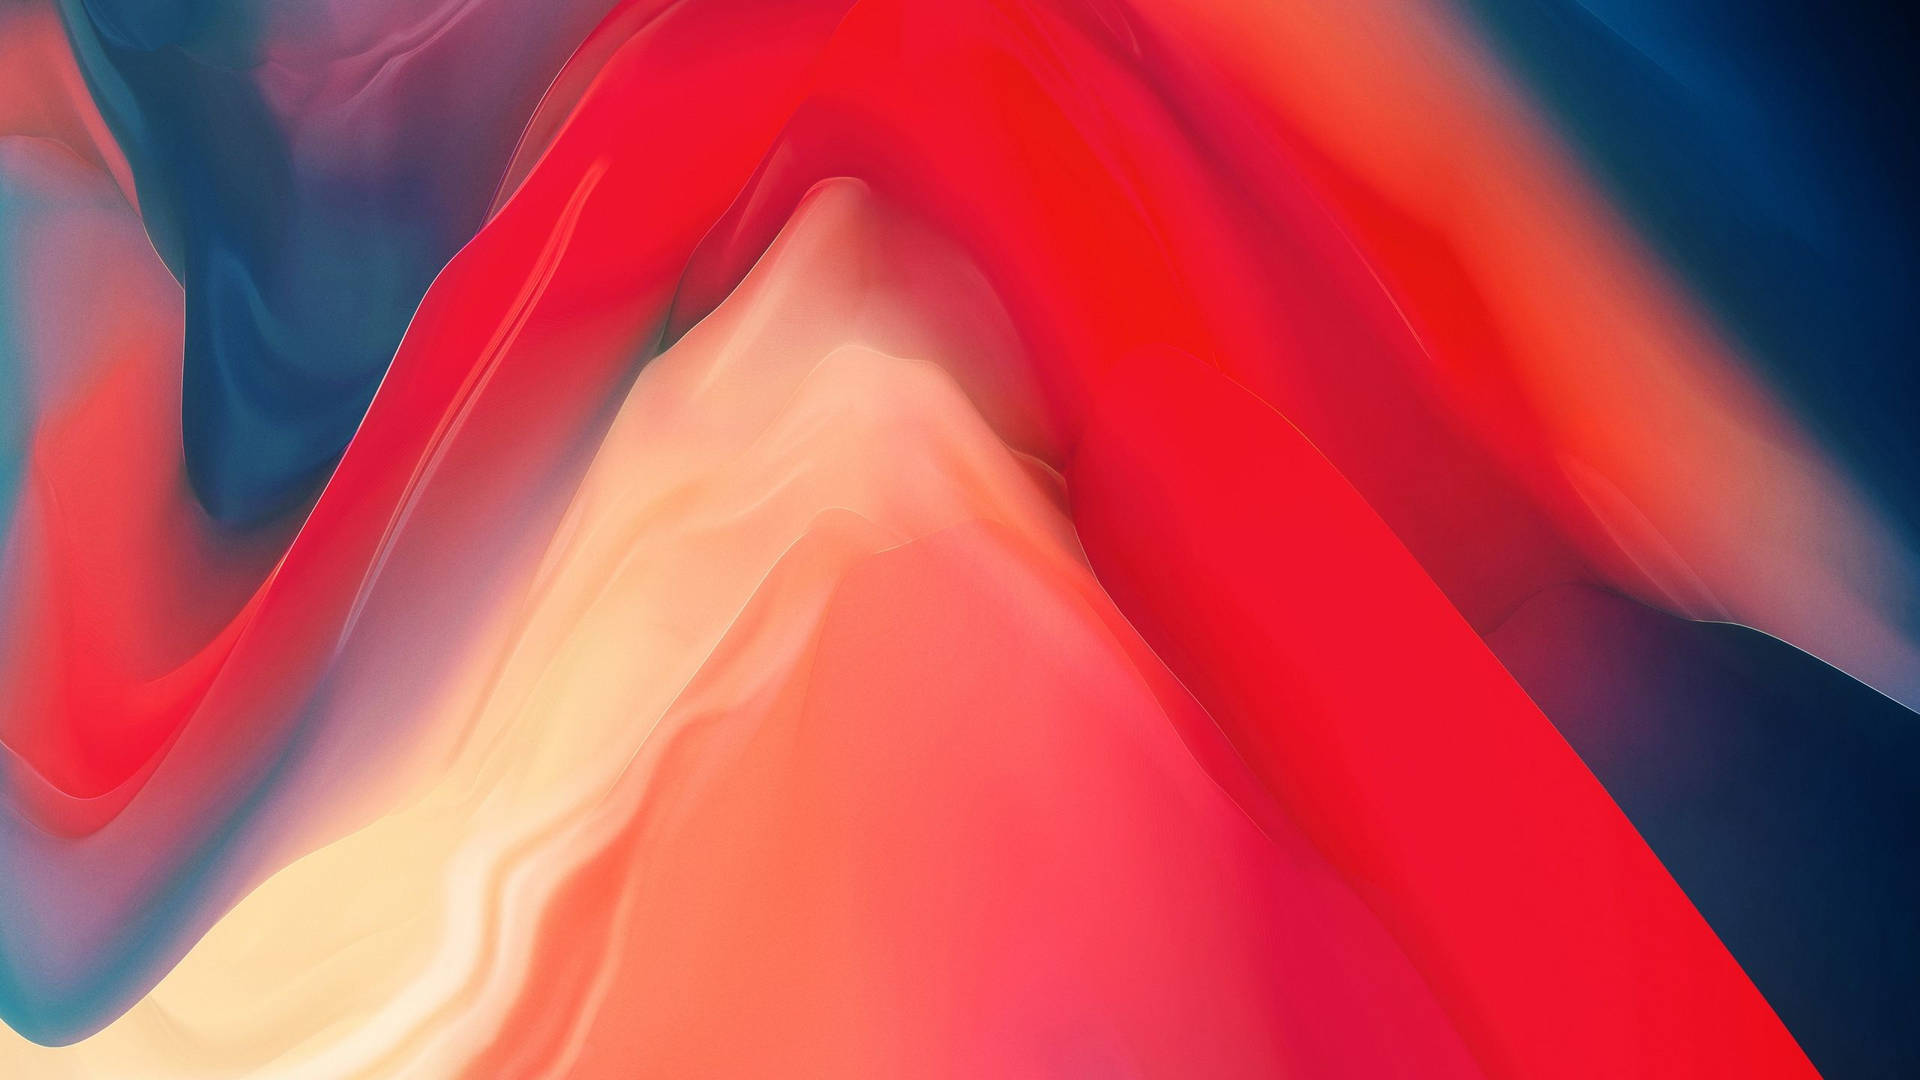 Peach, Blue, Red Abstract Graphic Art Wallpaper